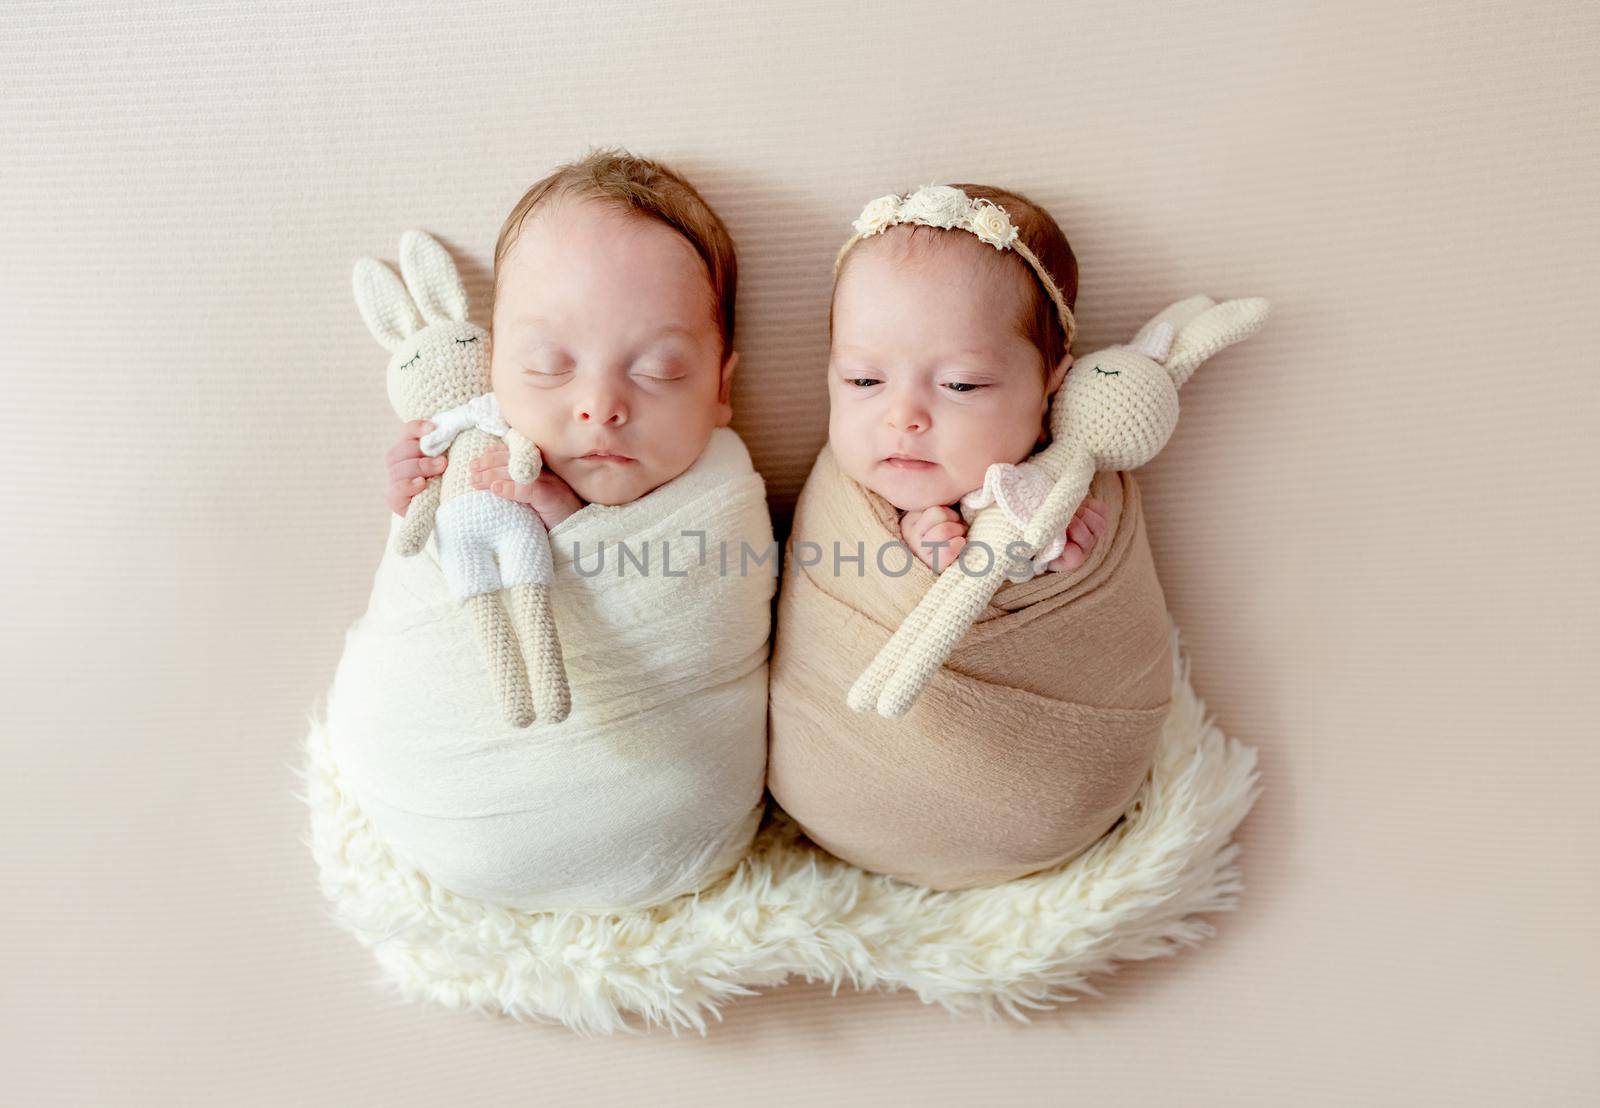 Newborn babies twins swaddled in fabric sleeping on fur. Infant child kids brother and sister studio photoshoot